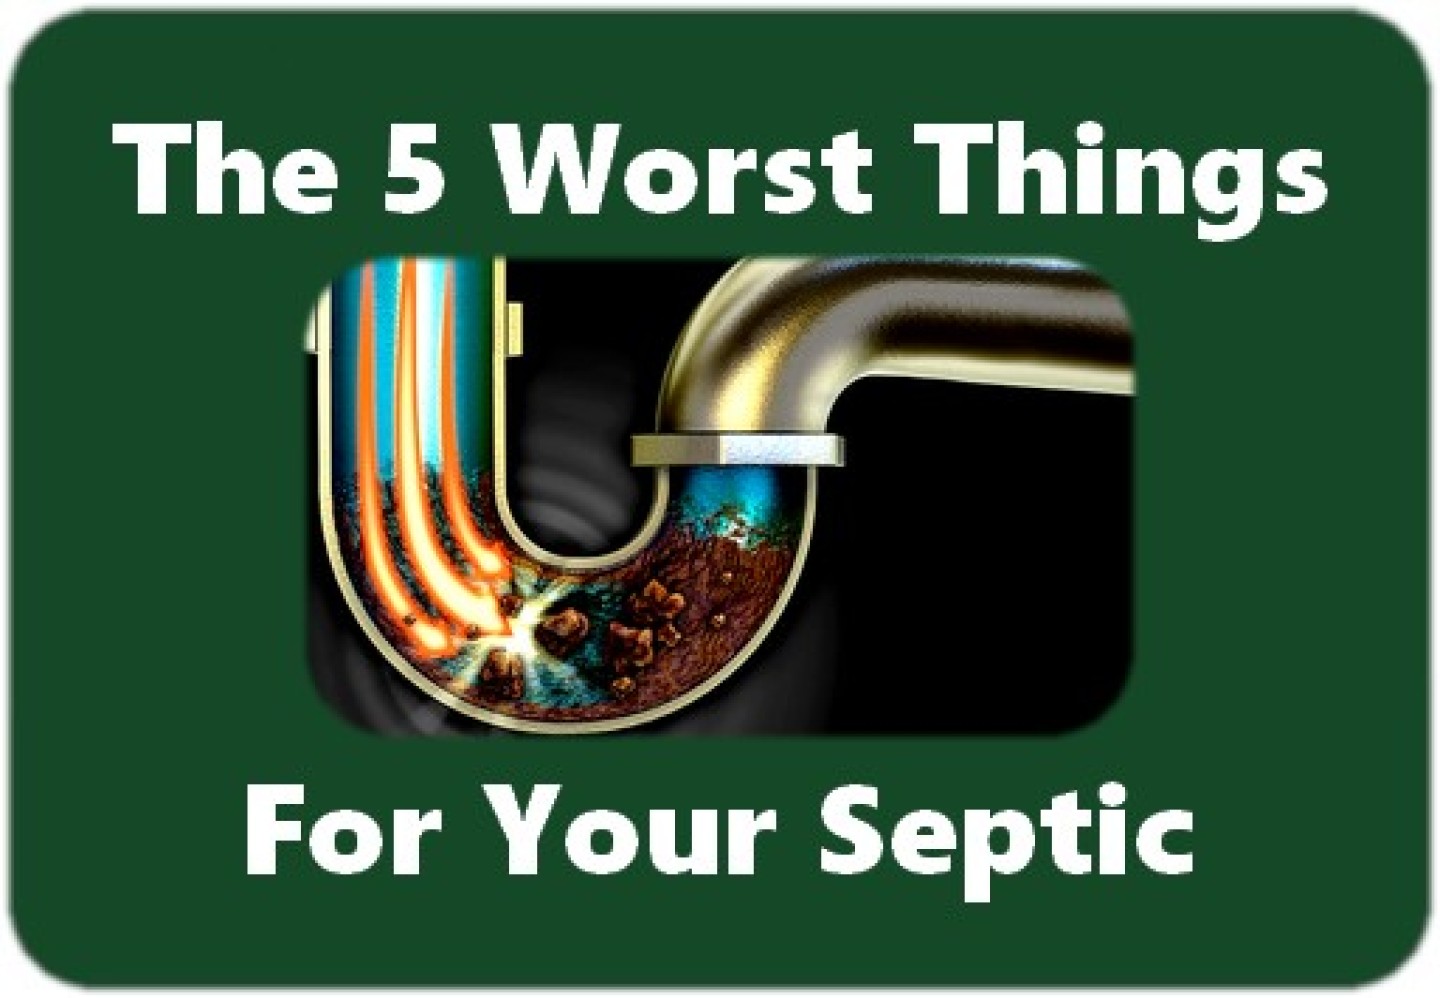 5 worst things for septic pipes